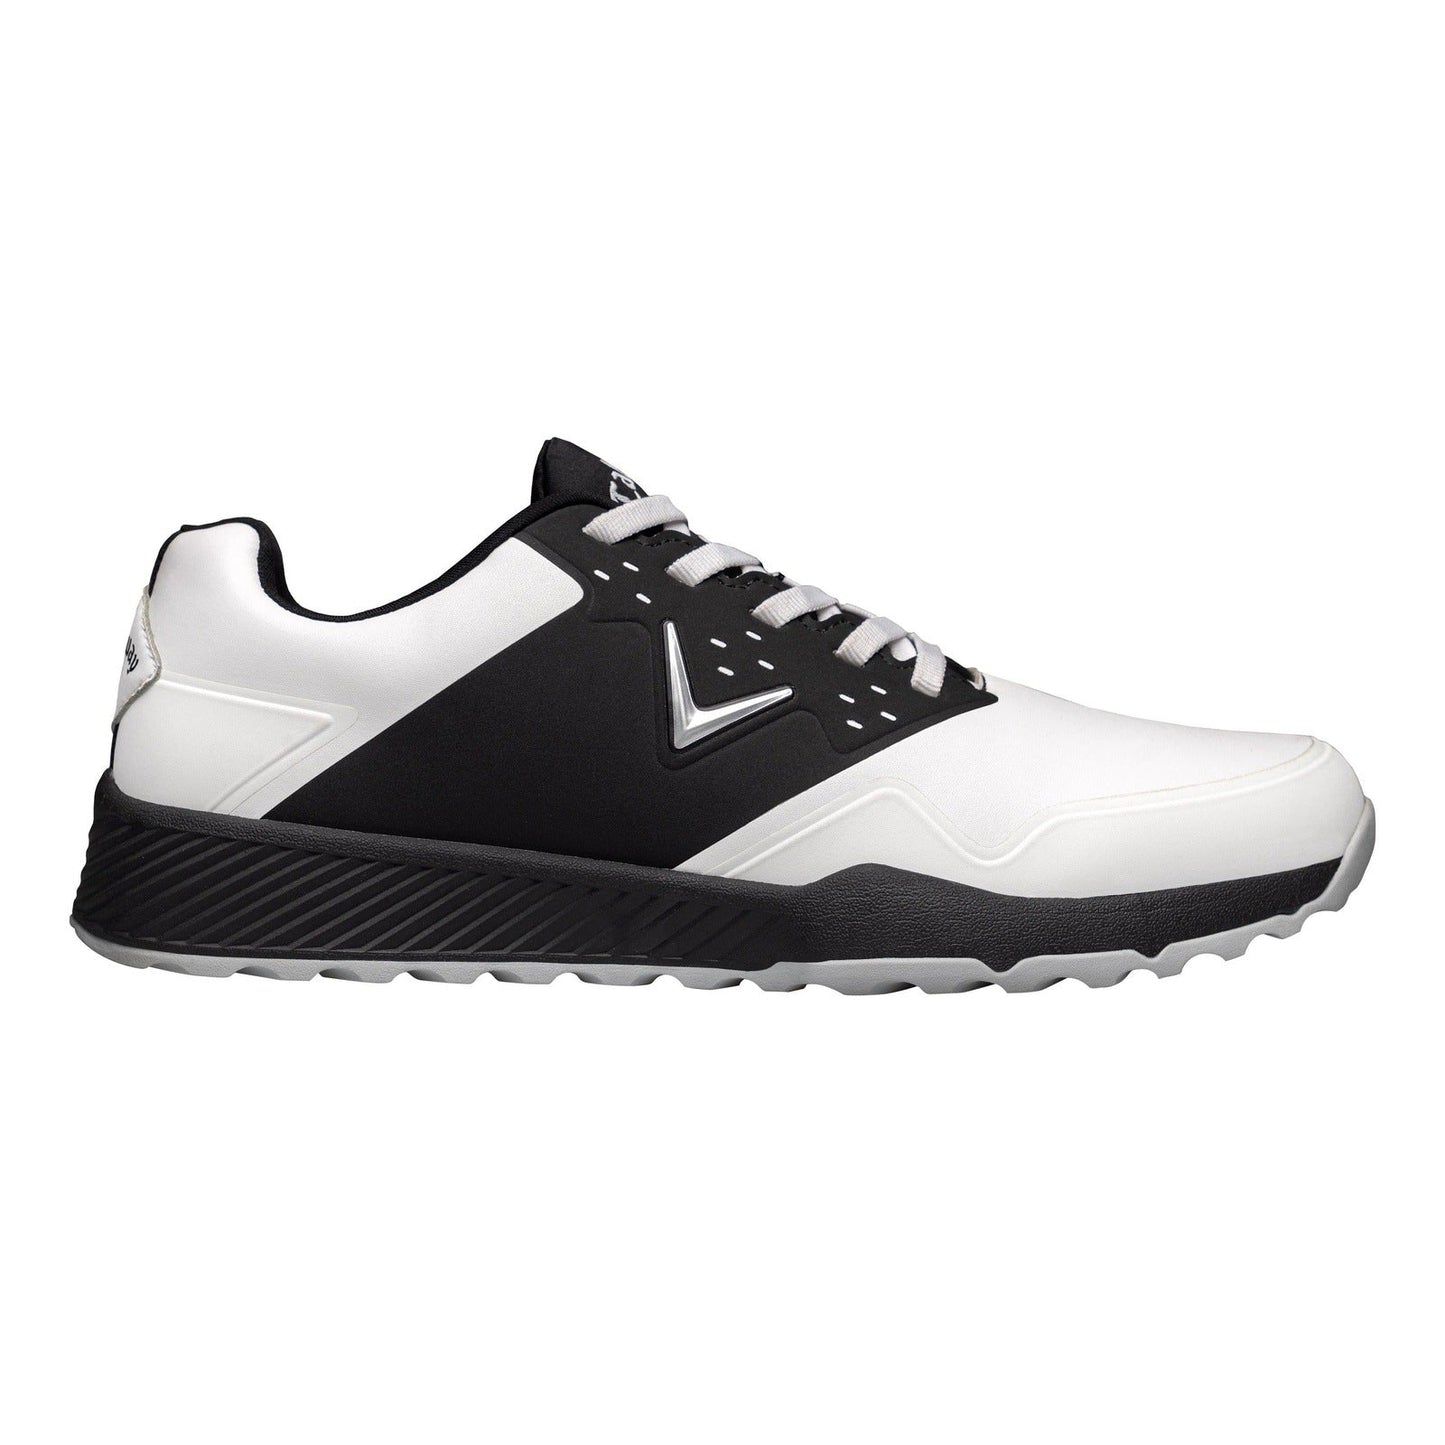 Callaway Chev Ace Golf Shoes M589